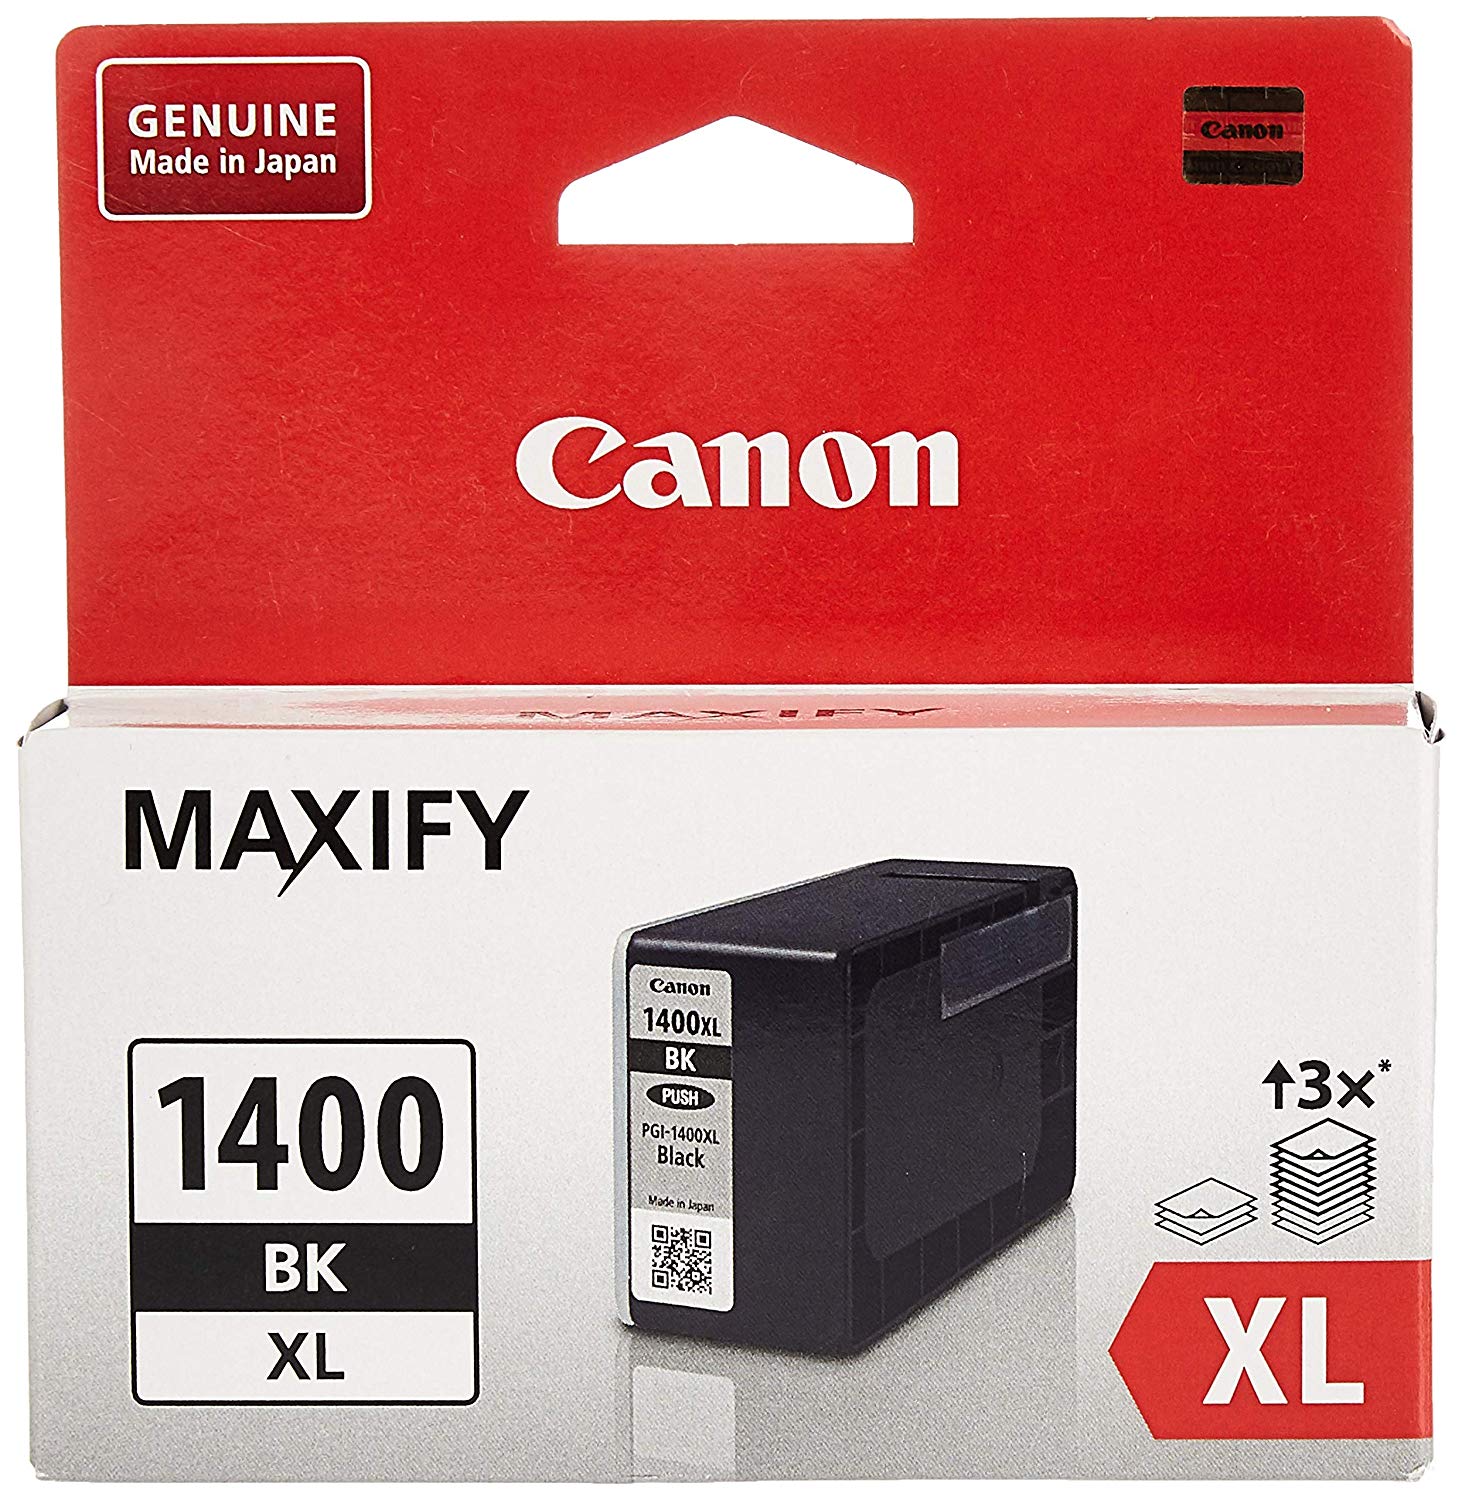 Canon 1400XL  Ink Cartridge for Maxify MB 2140 MB 2340 MB 2740 MB 2040